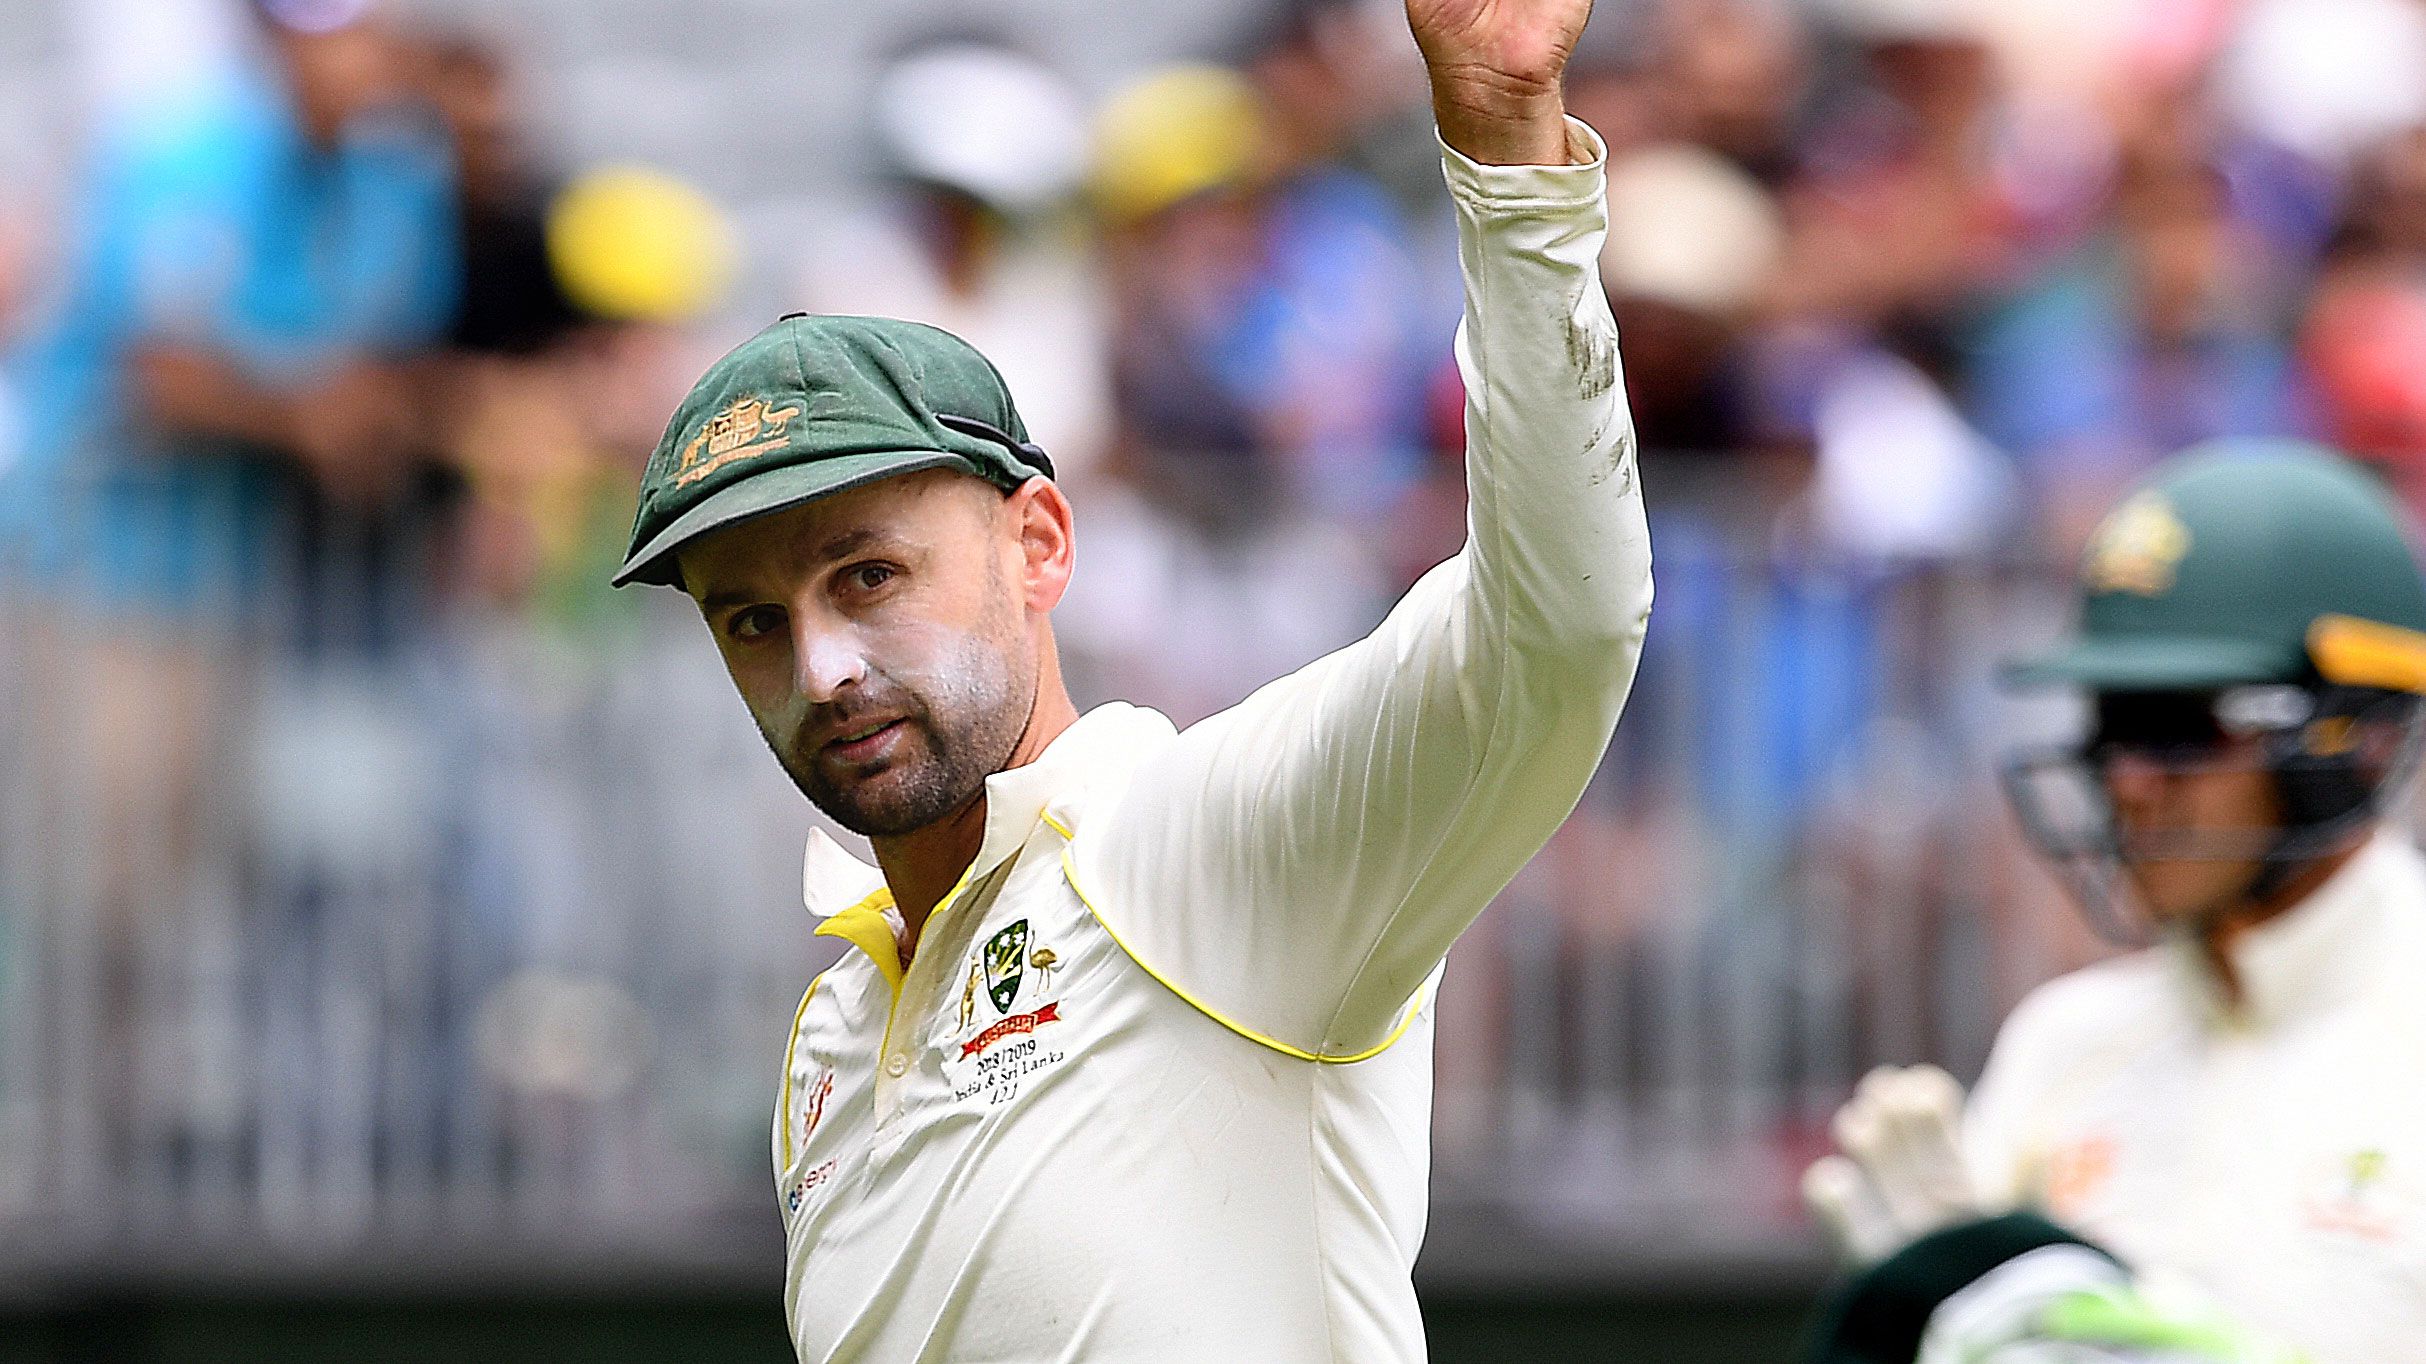 The batting coach who transformed Australia's champion off-spinner Nathan Lyon into a double threat